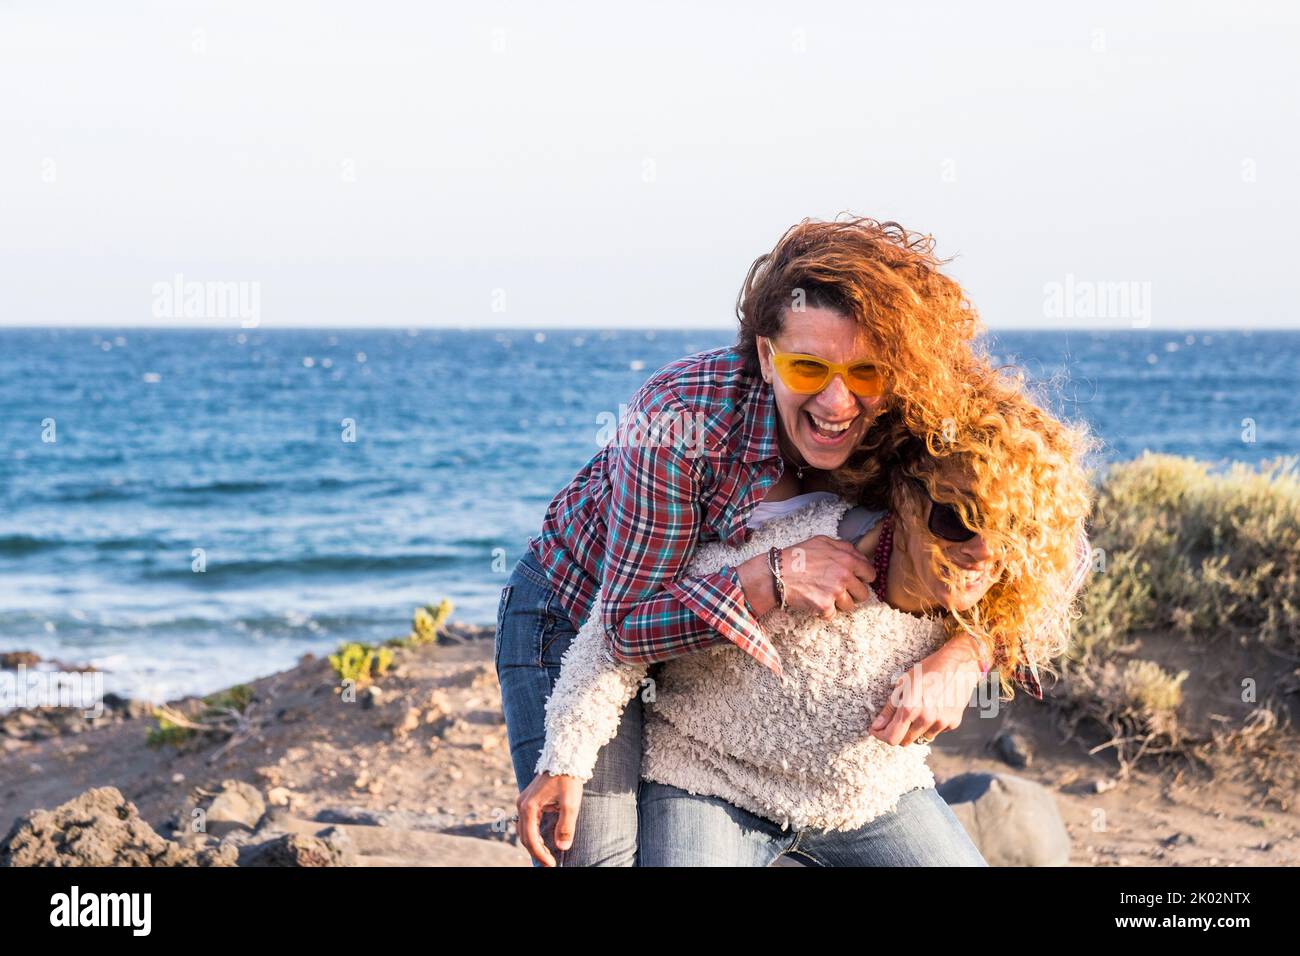 Couple of young adult woman having fun carrying in piggyback and laughing a lot. Curly hair female people enjoy leisure activity outdoor with ocean in background. Summer holiday vacation lifestyle Stock Photo